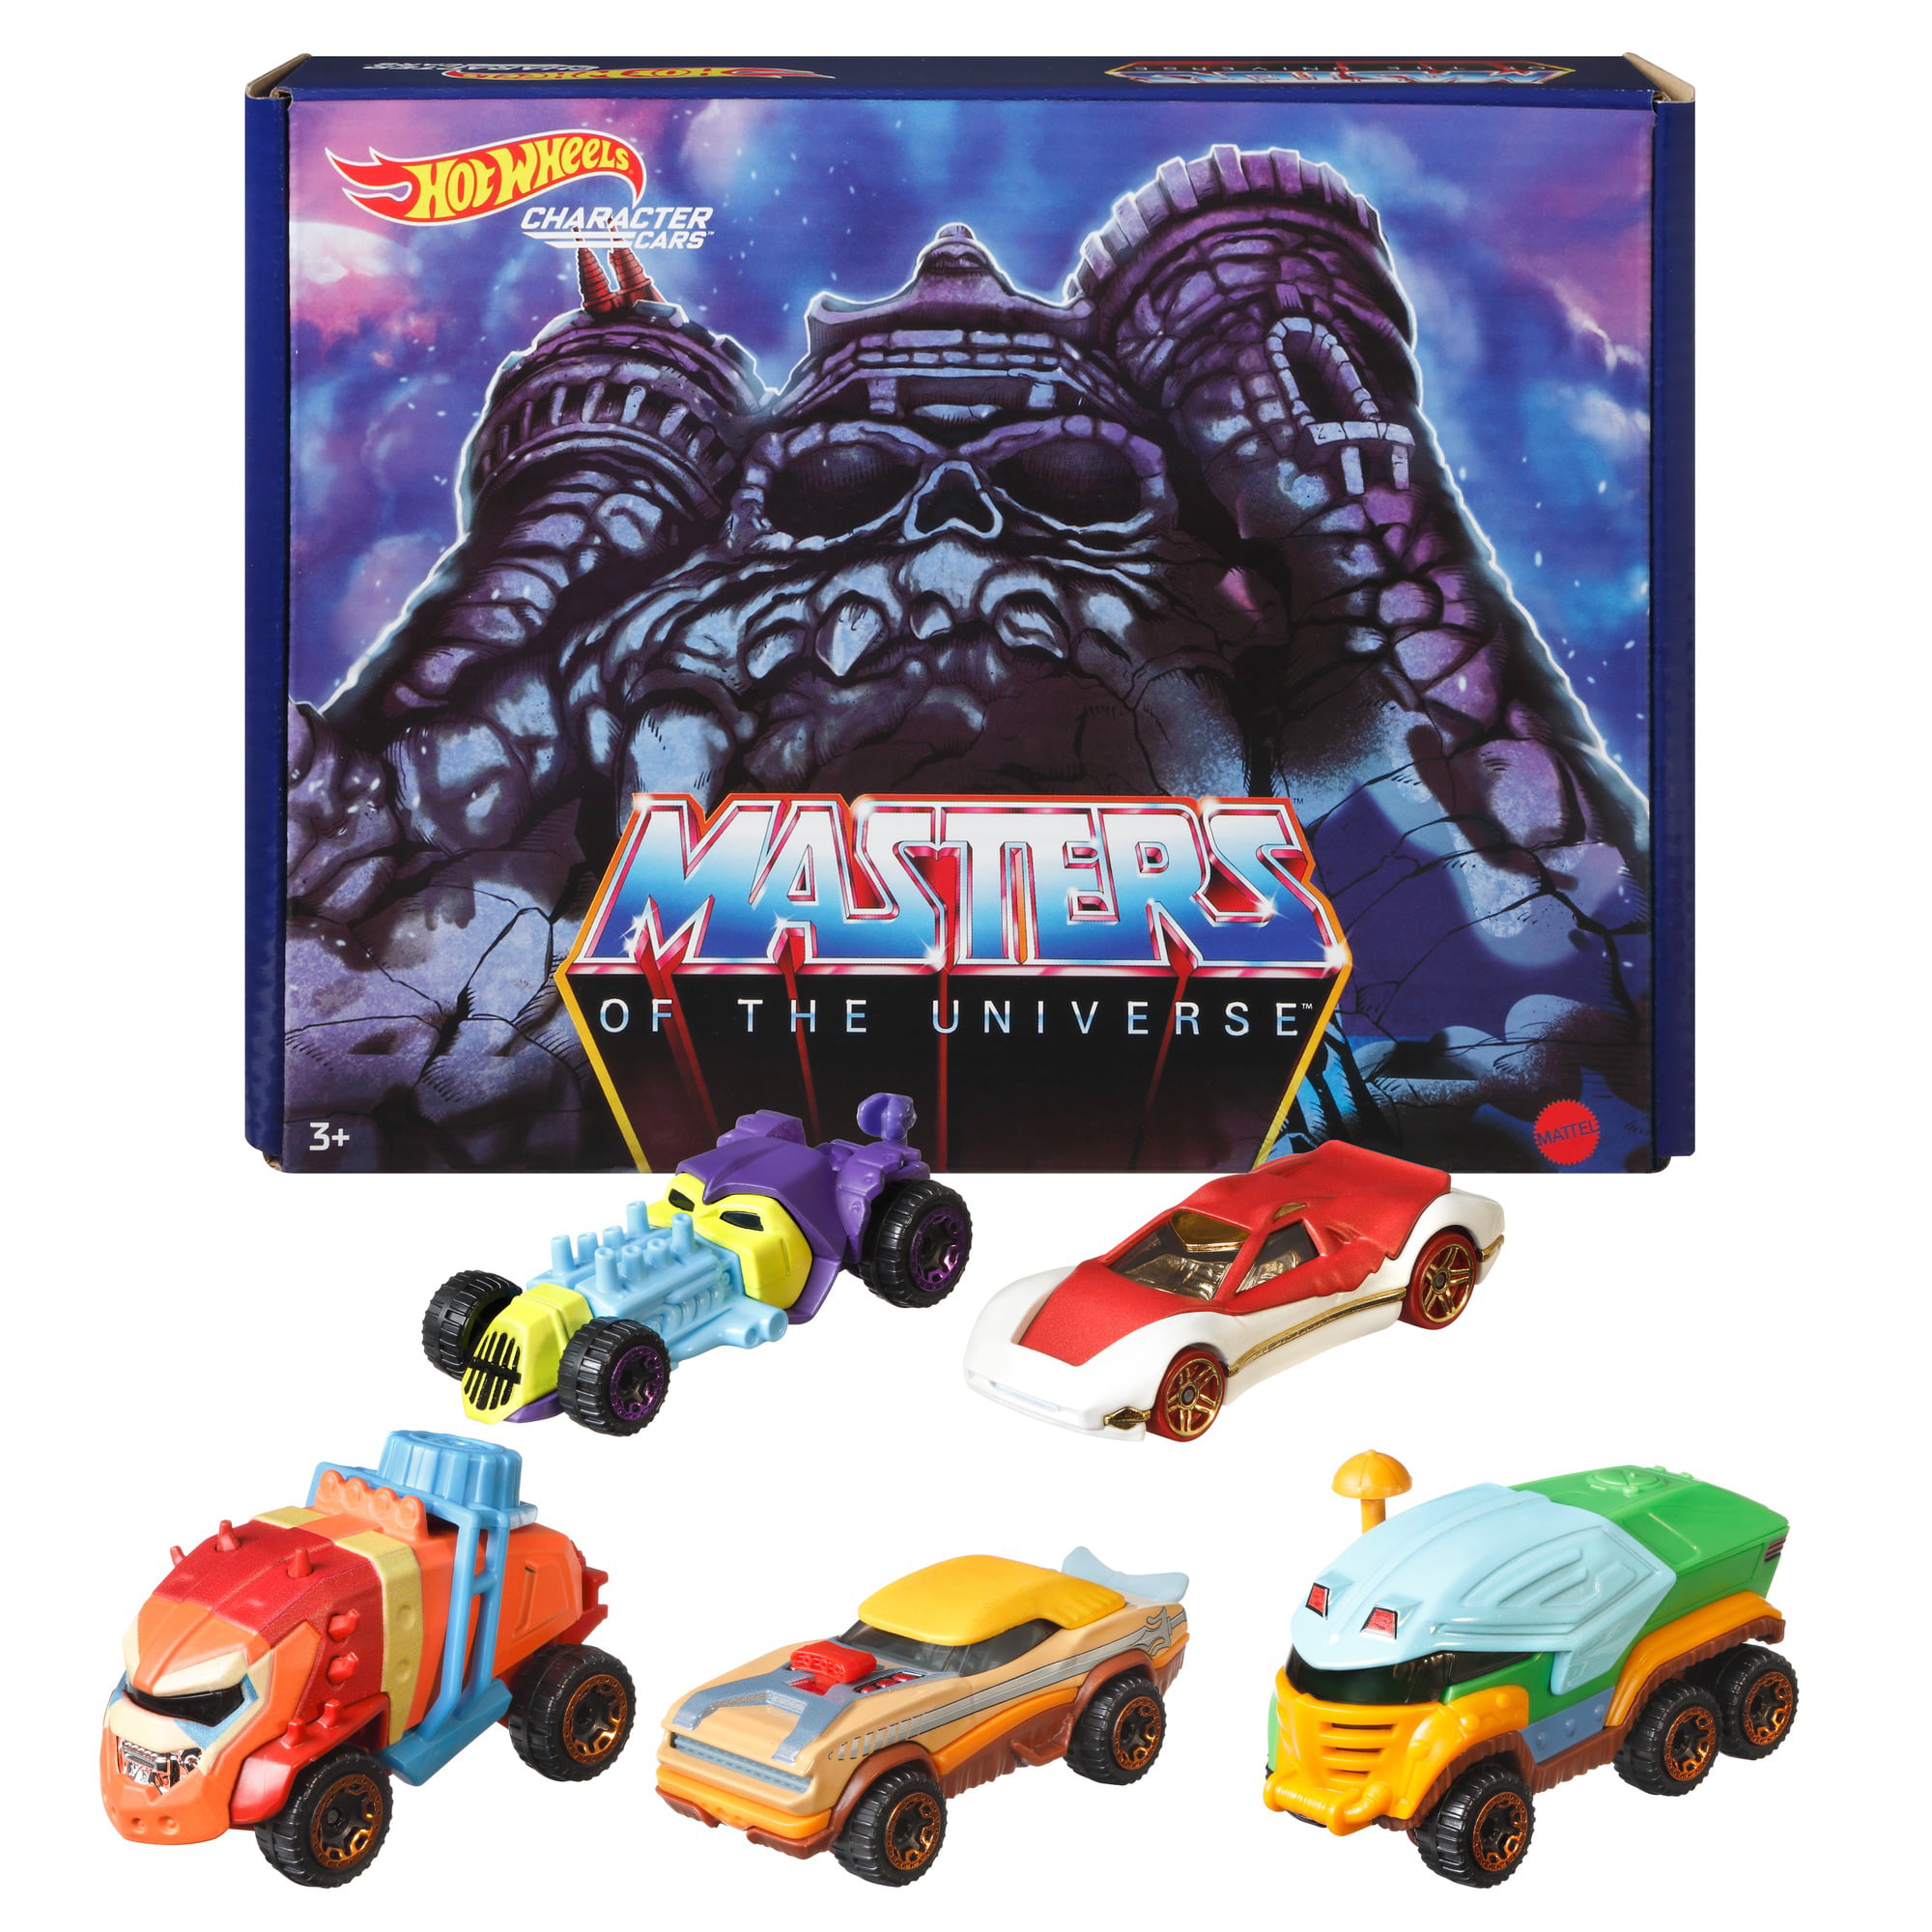 Auswahl Hot Wheels Character Cars Masters Of The Universe Charakterautos 1:64 